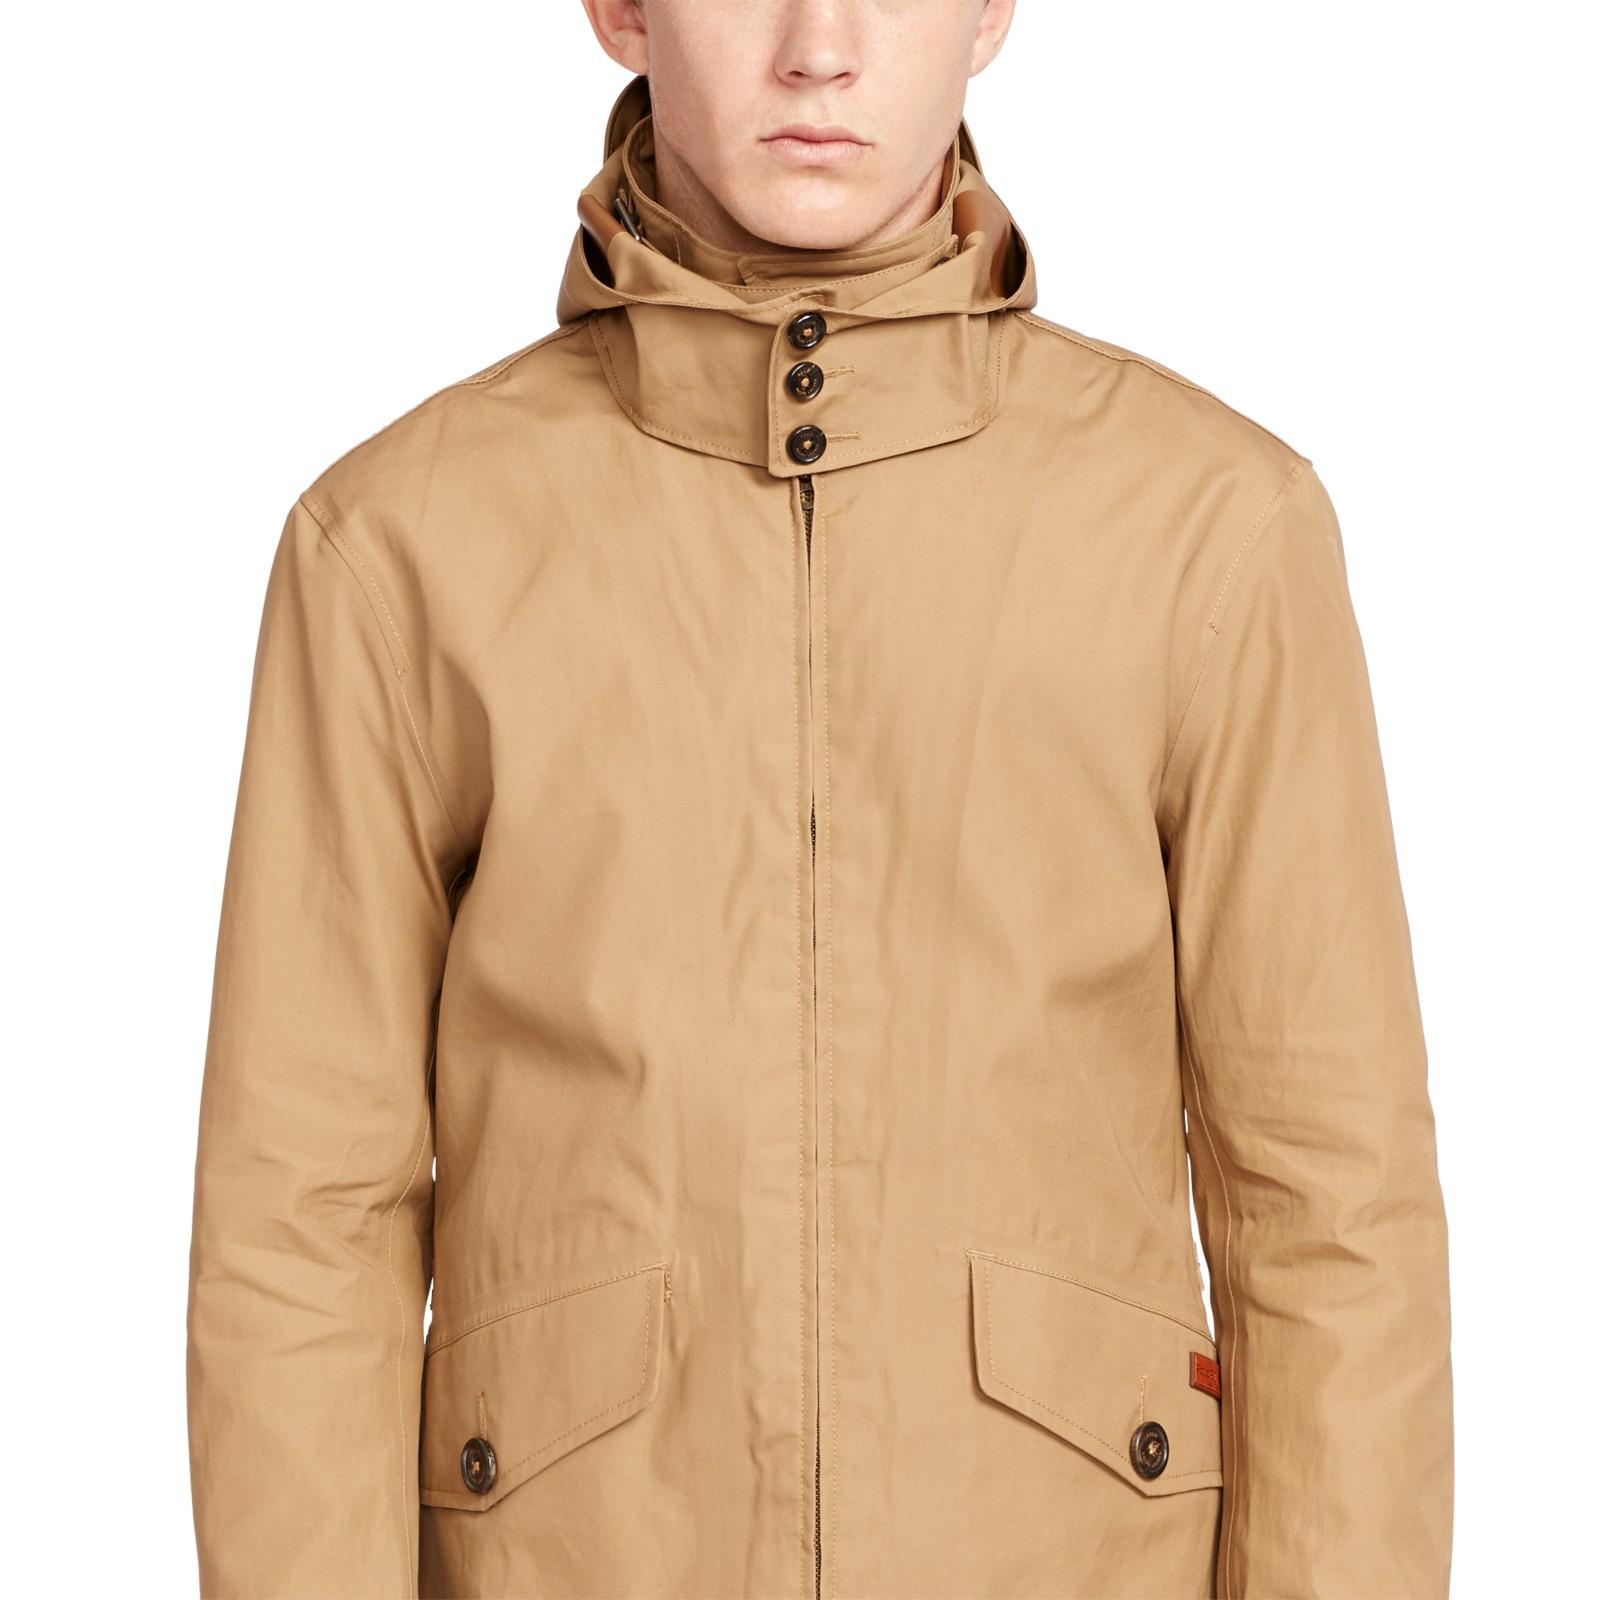 Lyst - Polo Ralph Lauren Cotton Twill Jacket in Natural 